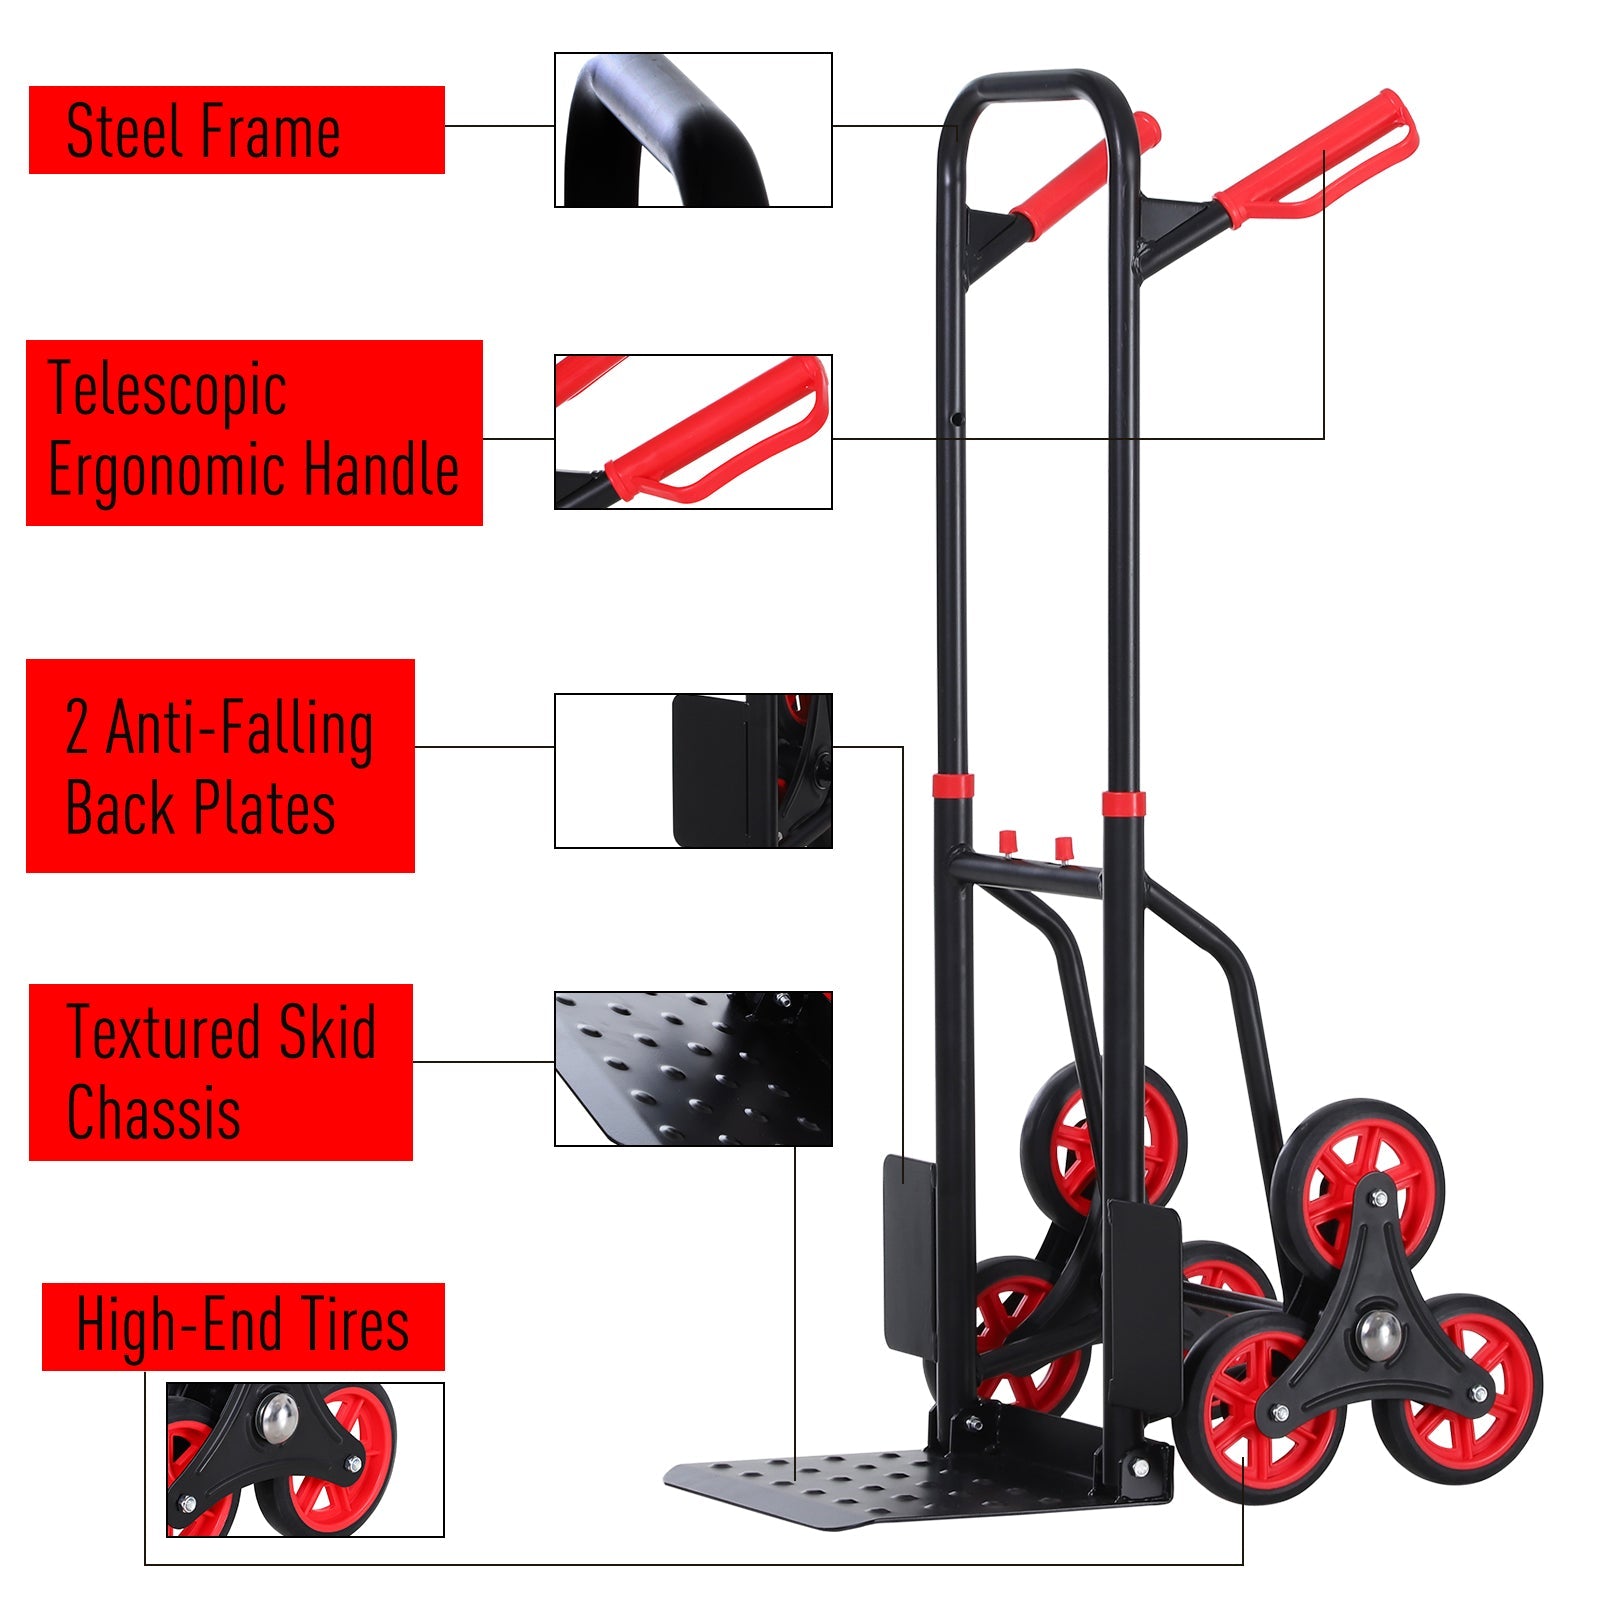 6-Wheels Stair Climber Trolley Cart Hand Truck and Dolly Foldable Steel Load Cart, 264lbs Capacity - Gallery Canada